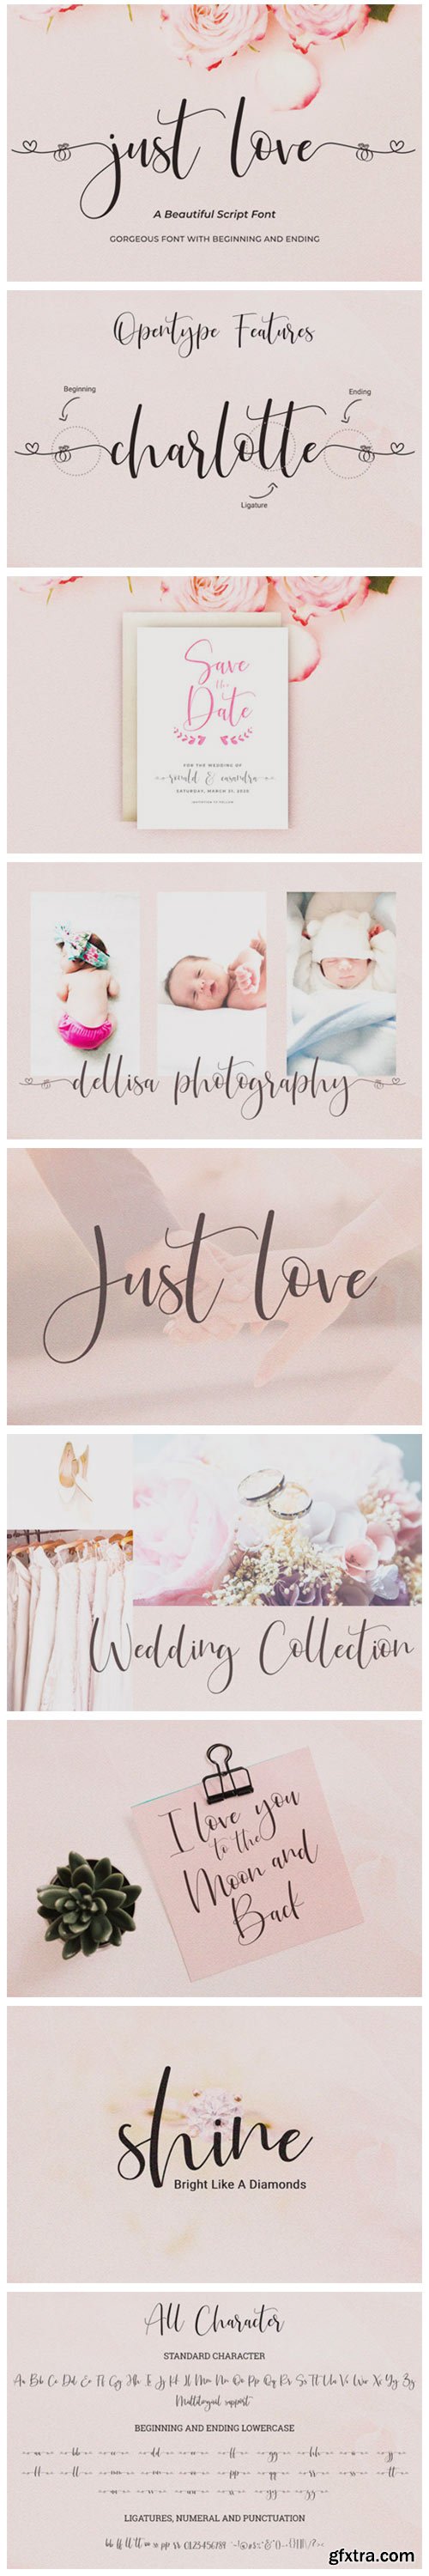 Just Love Font